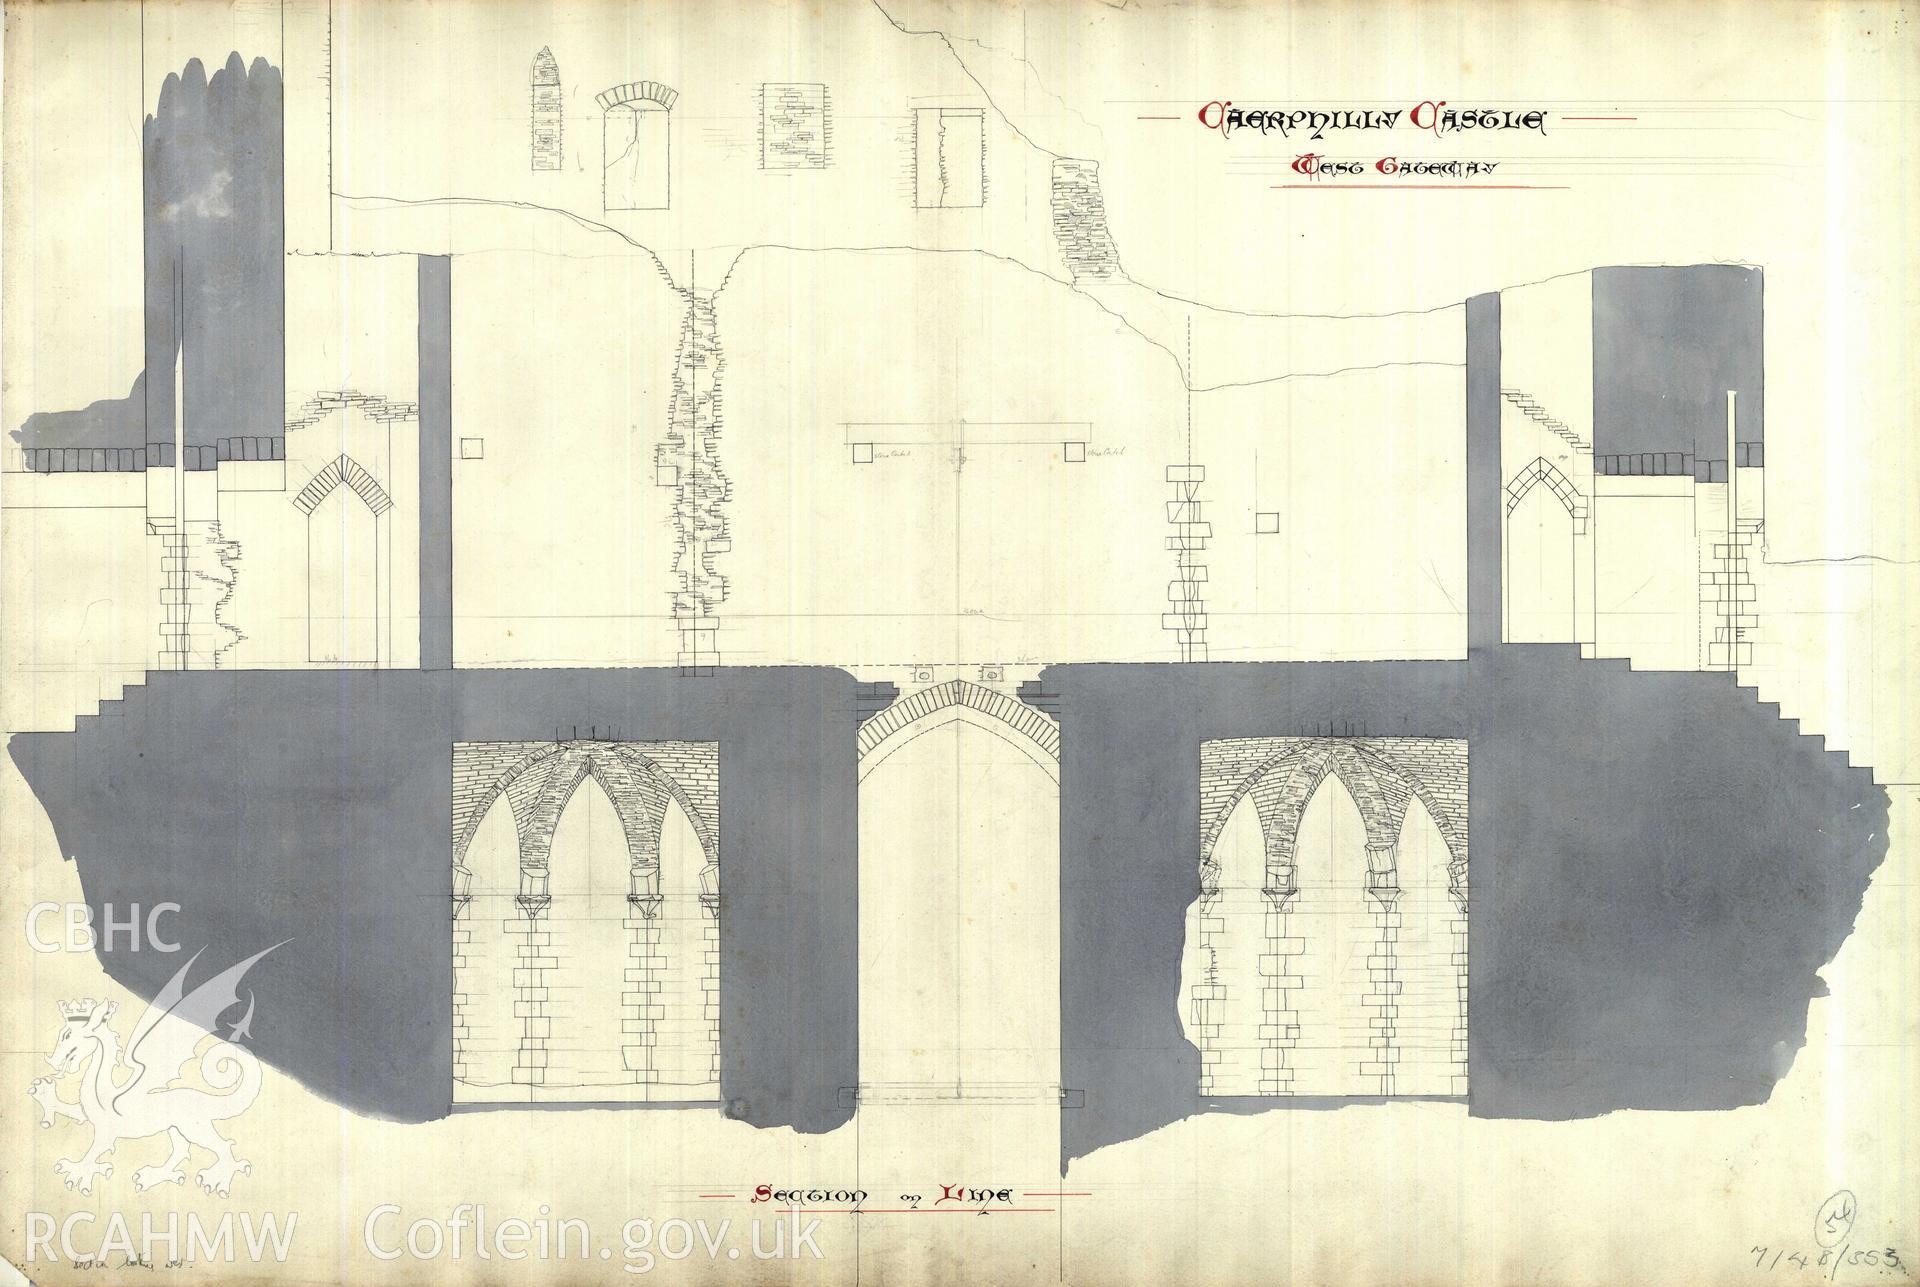 Cadw guardianship monument drawing of Caerphilly Castle. Inner W gate, section looking W. Cadw Ref. No:714B/353. Scale 1:24.